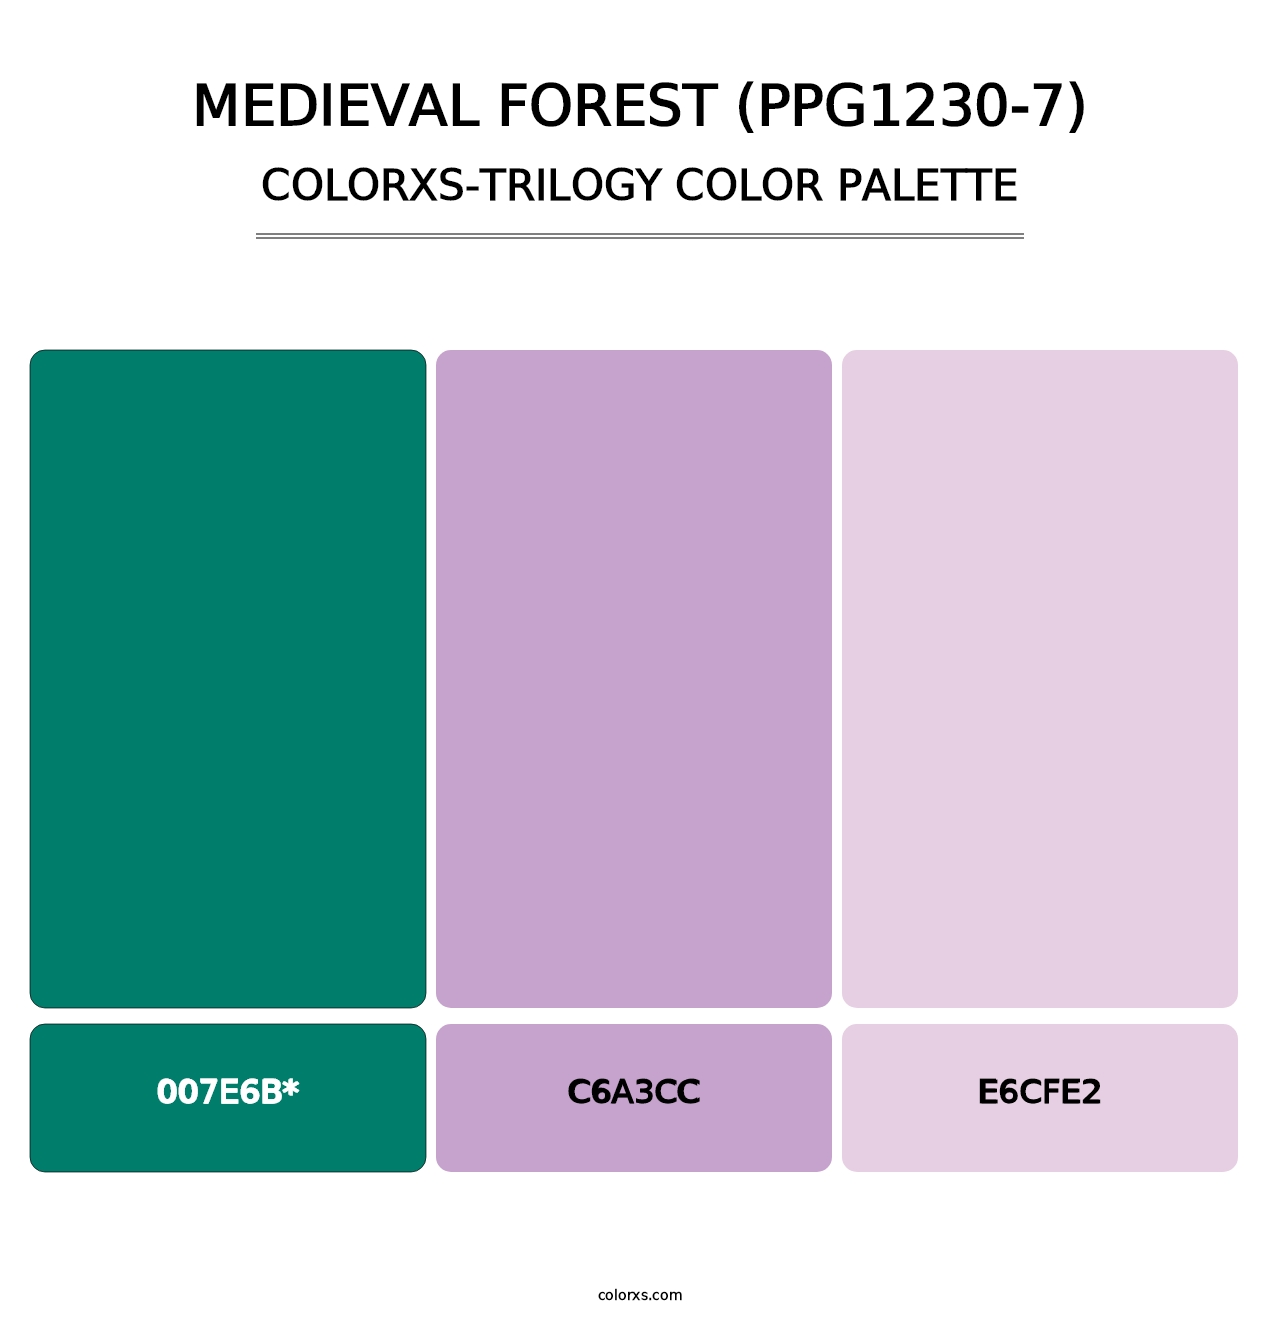 Medieval Forest (PPG1230-7) - Colorxs Trilogy Palette